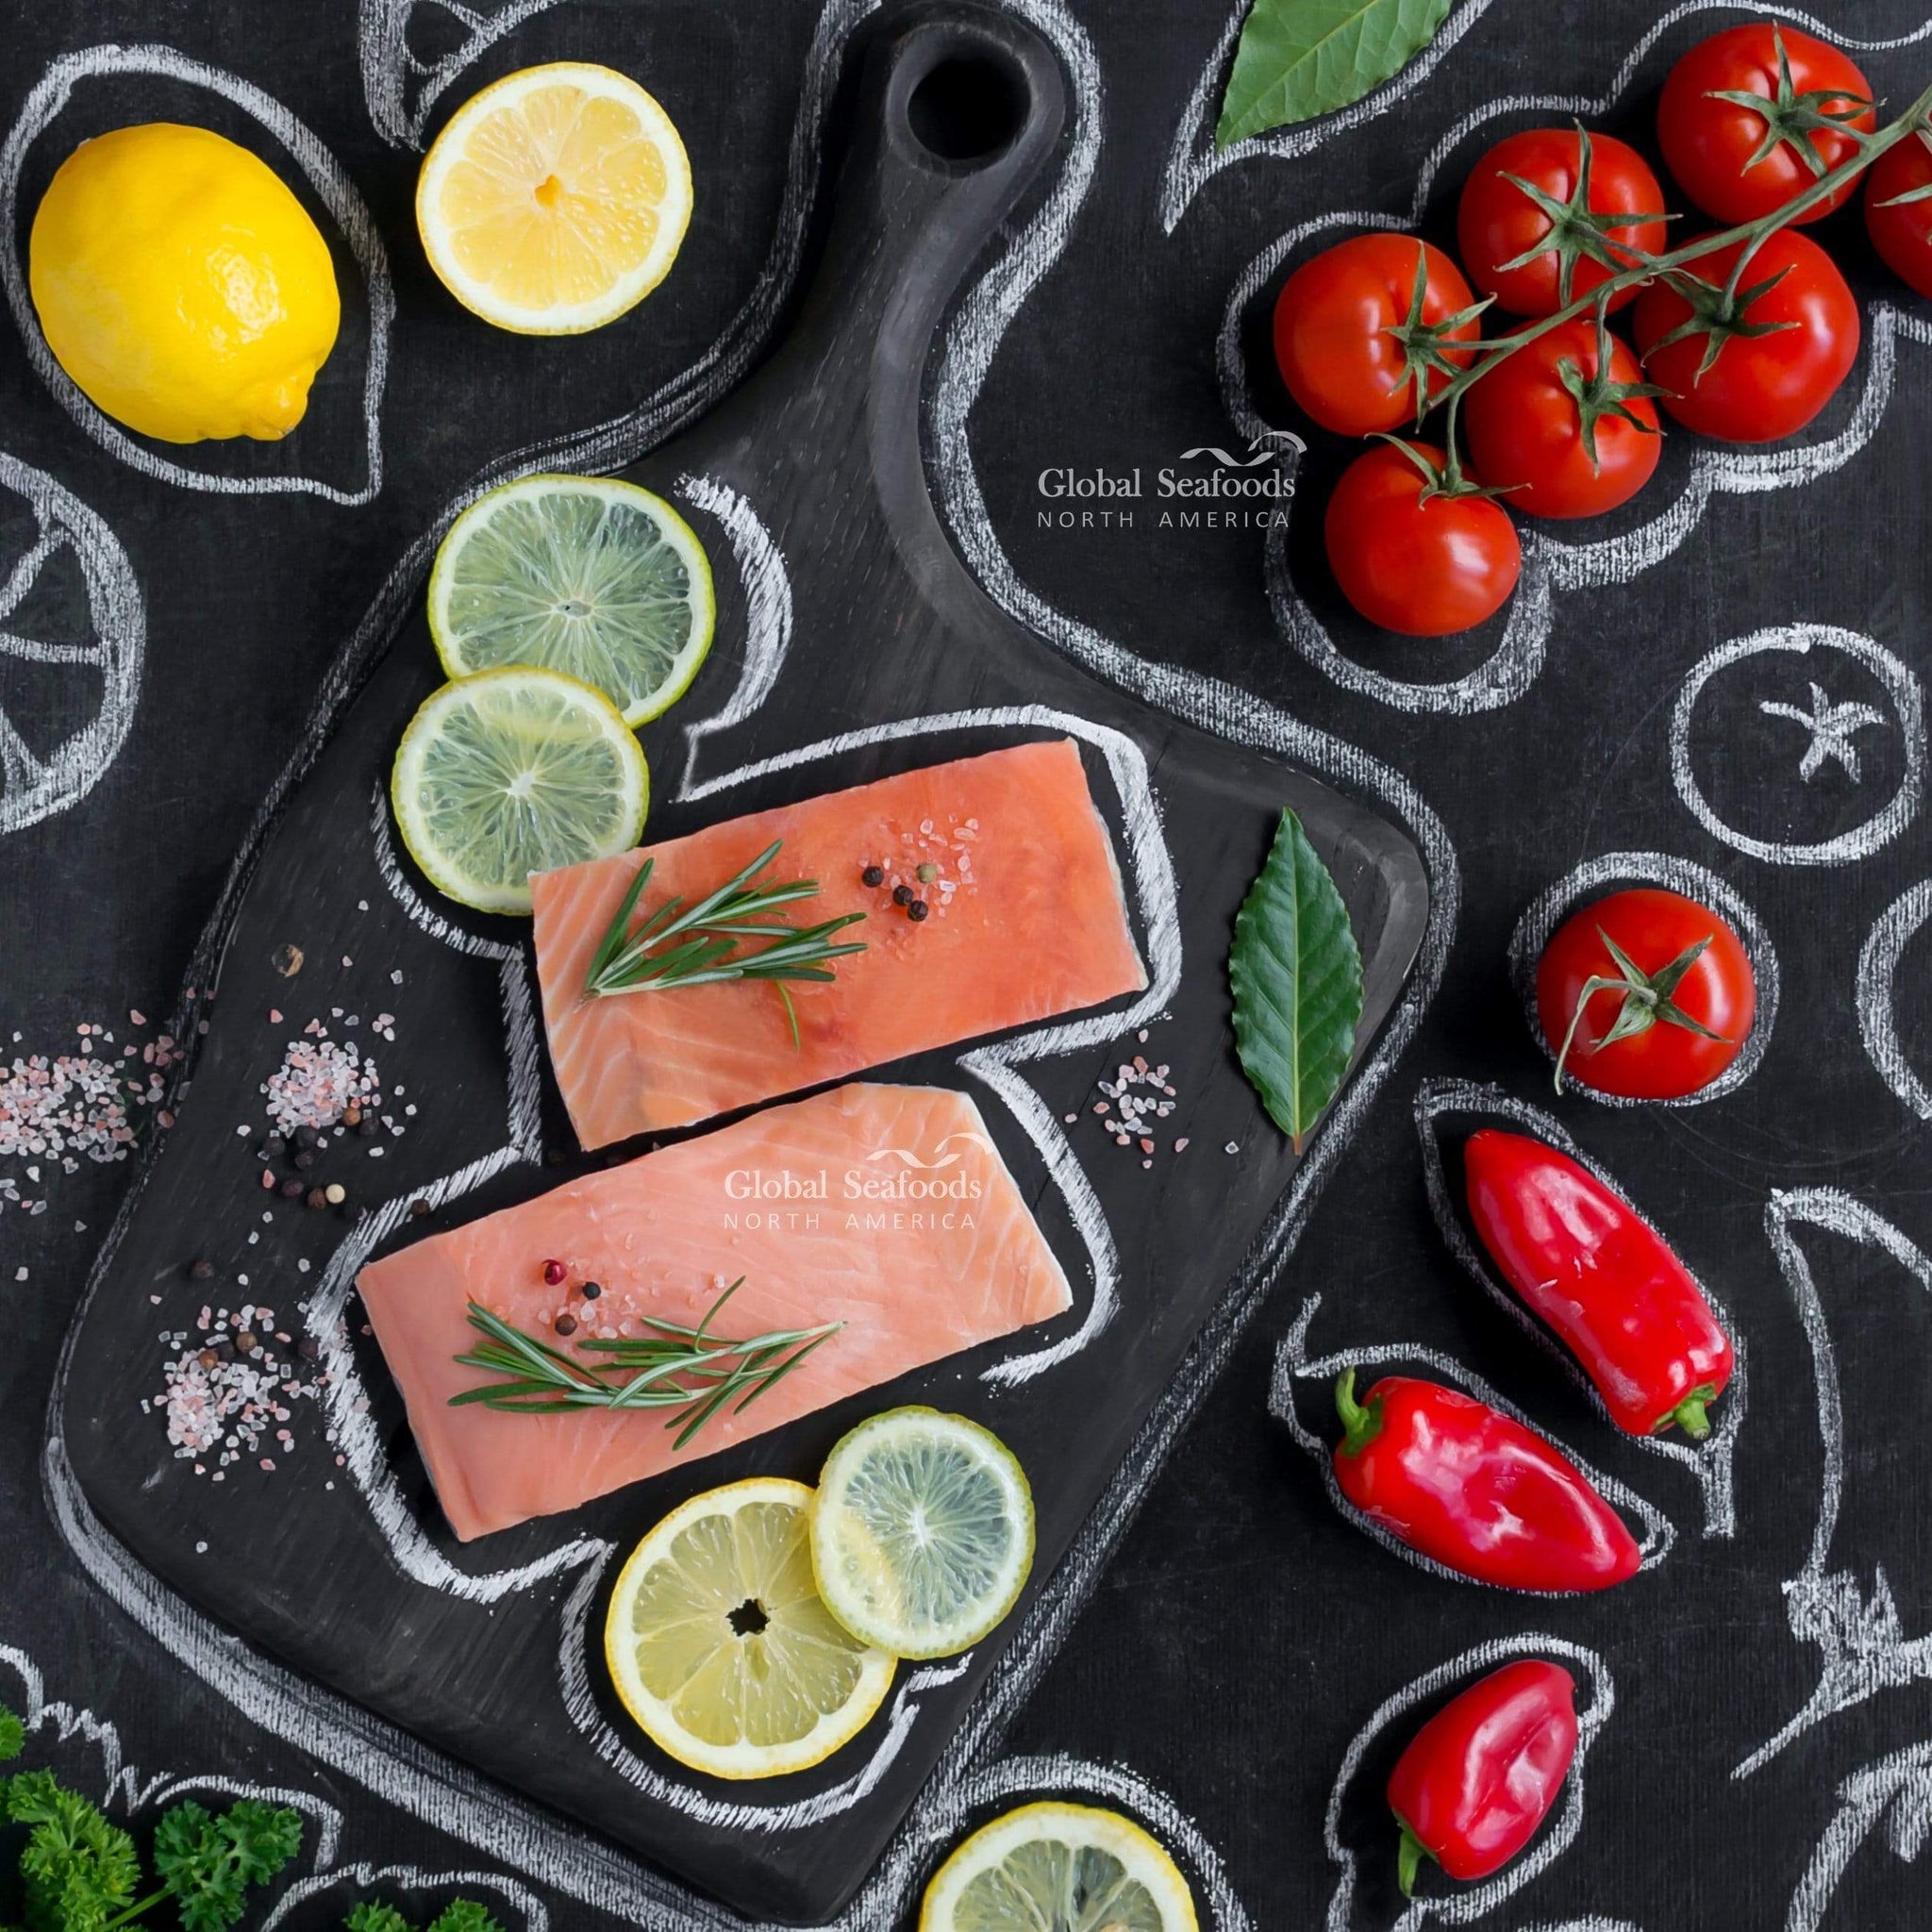 Wild-caught Alaskan Chum Salmon fillet portioned at 8 oz, displayed on ice to highlight its freshness and premium quality